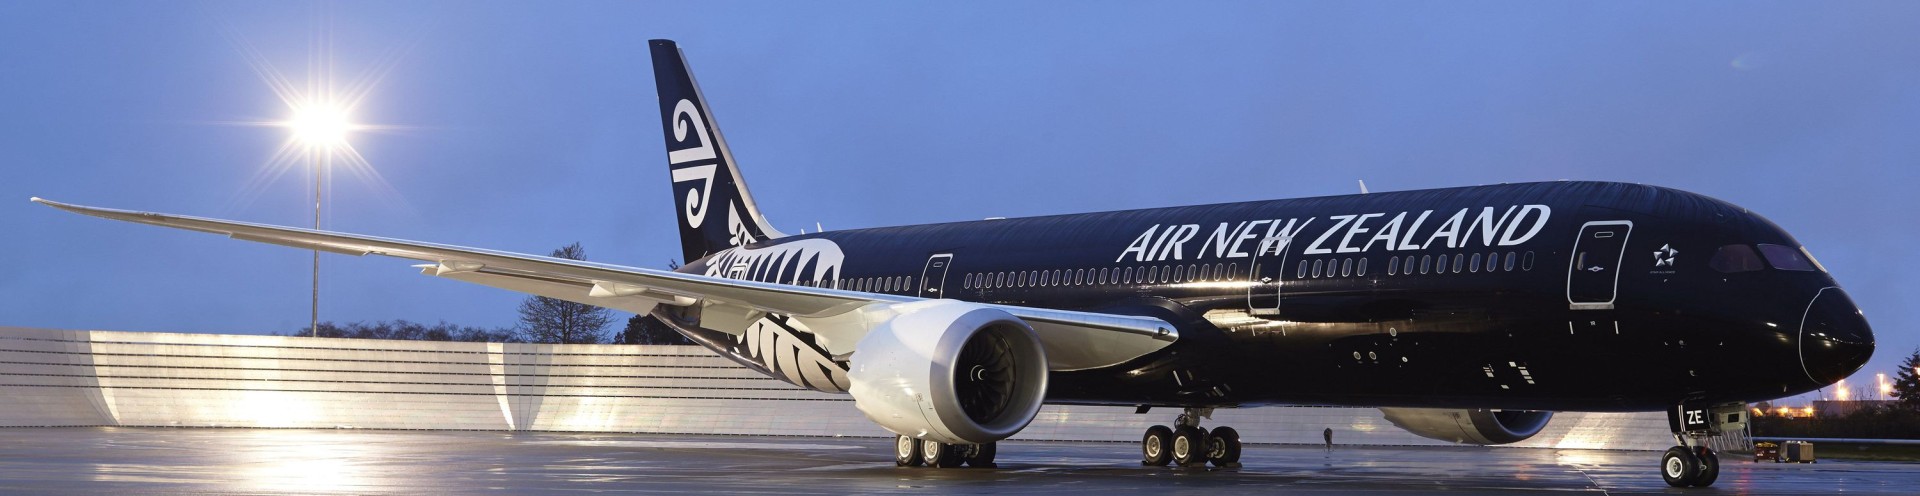 Air New Zealand to add four new ATR 72-600 and two A-321neo aircraft to its fleet